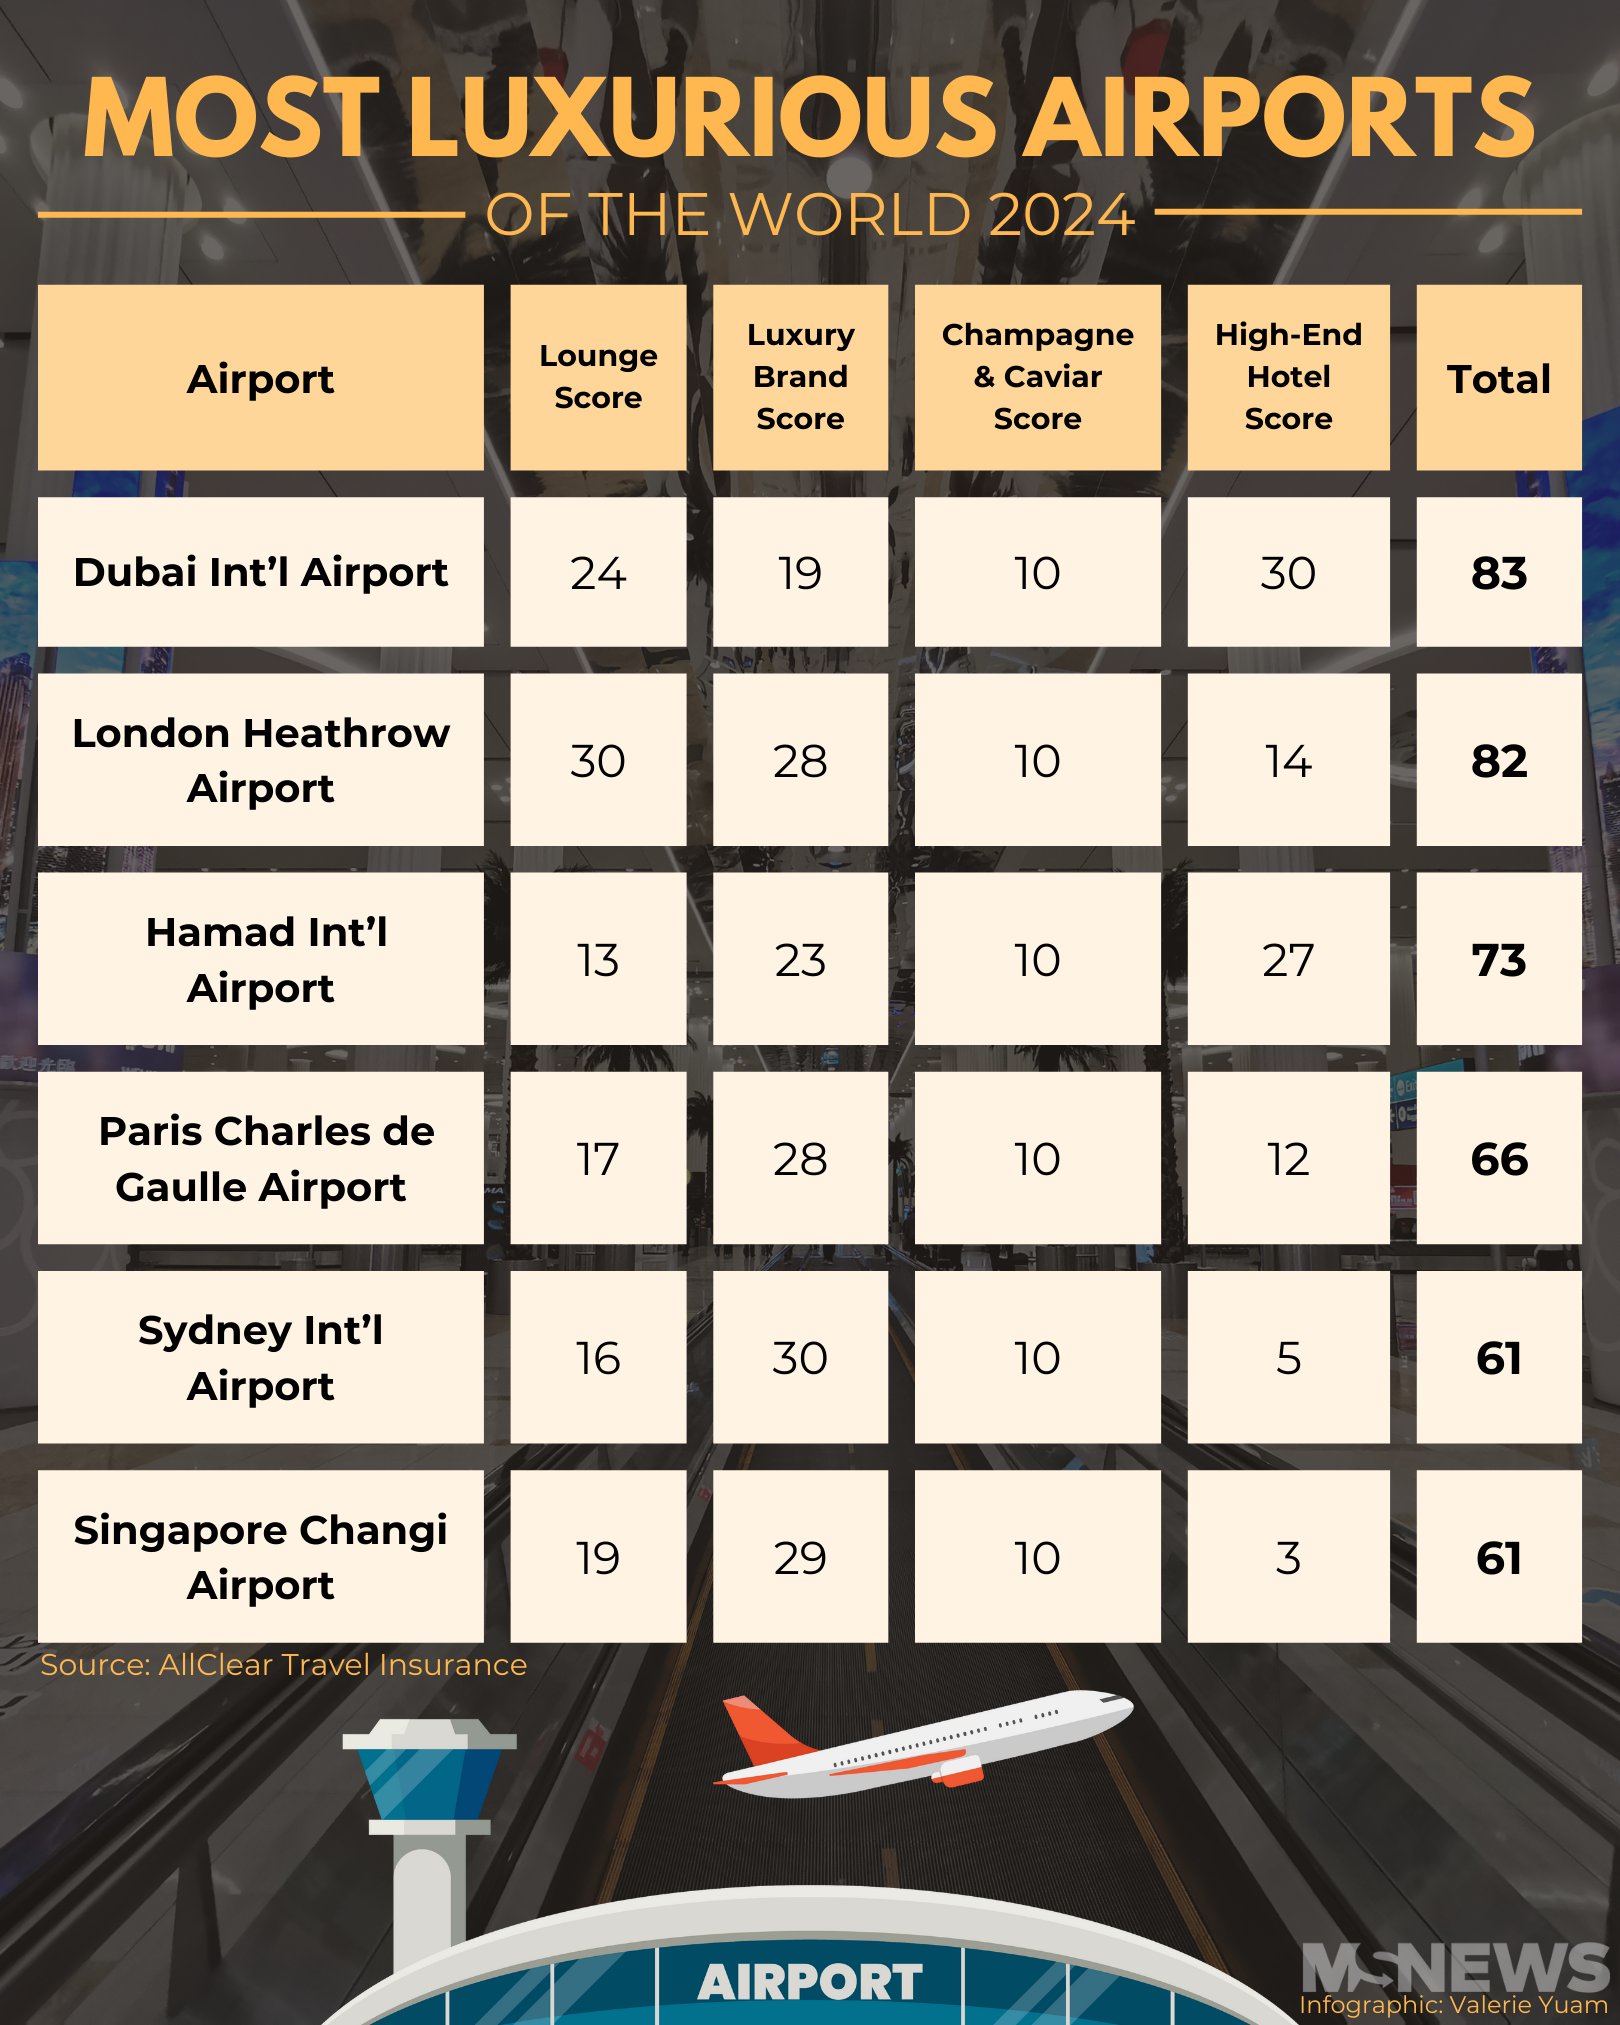 Changi Airport ranked 5th most luxurious airport, Dubai tops list thanks to 5-star hotels nearby - MS News